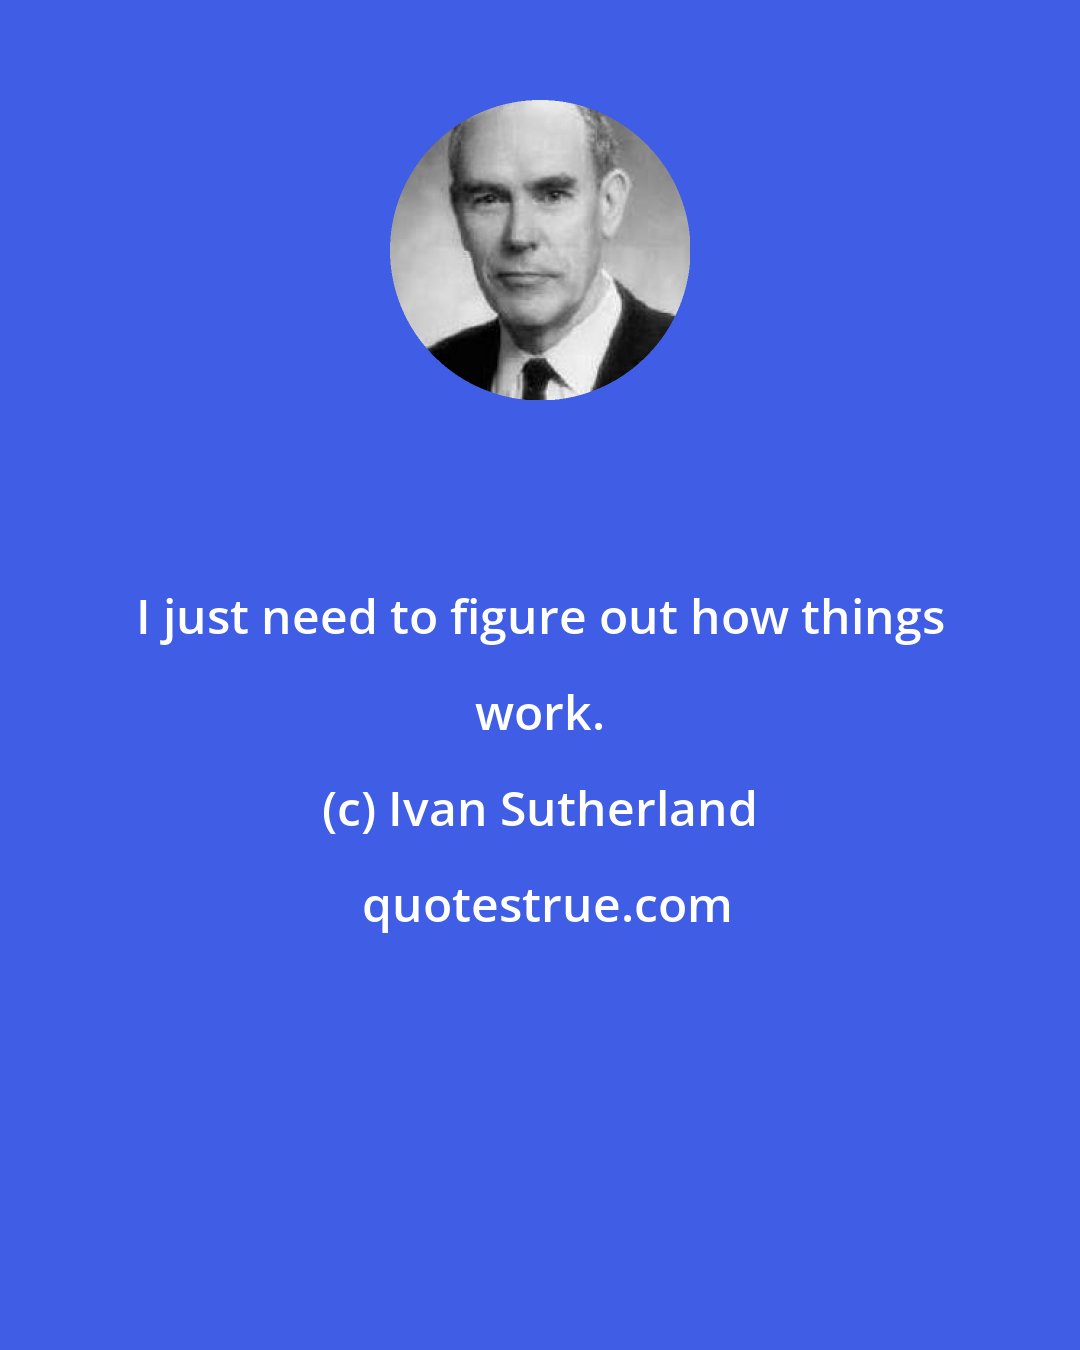 Ivan Sutherland: I just need to figure out how things work.